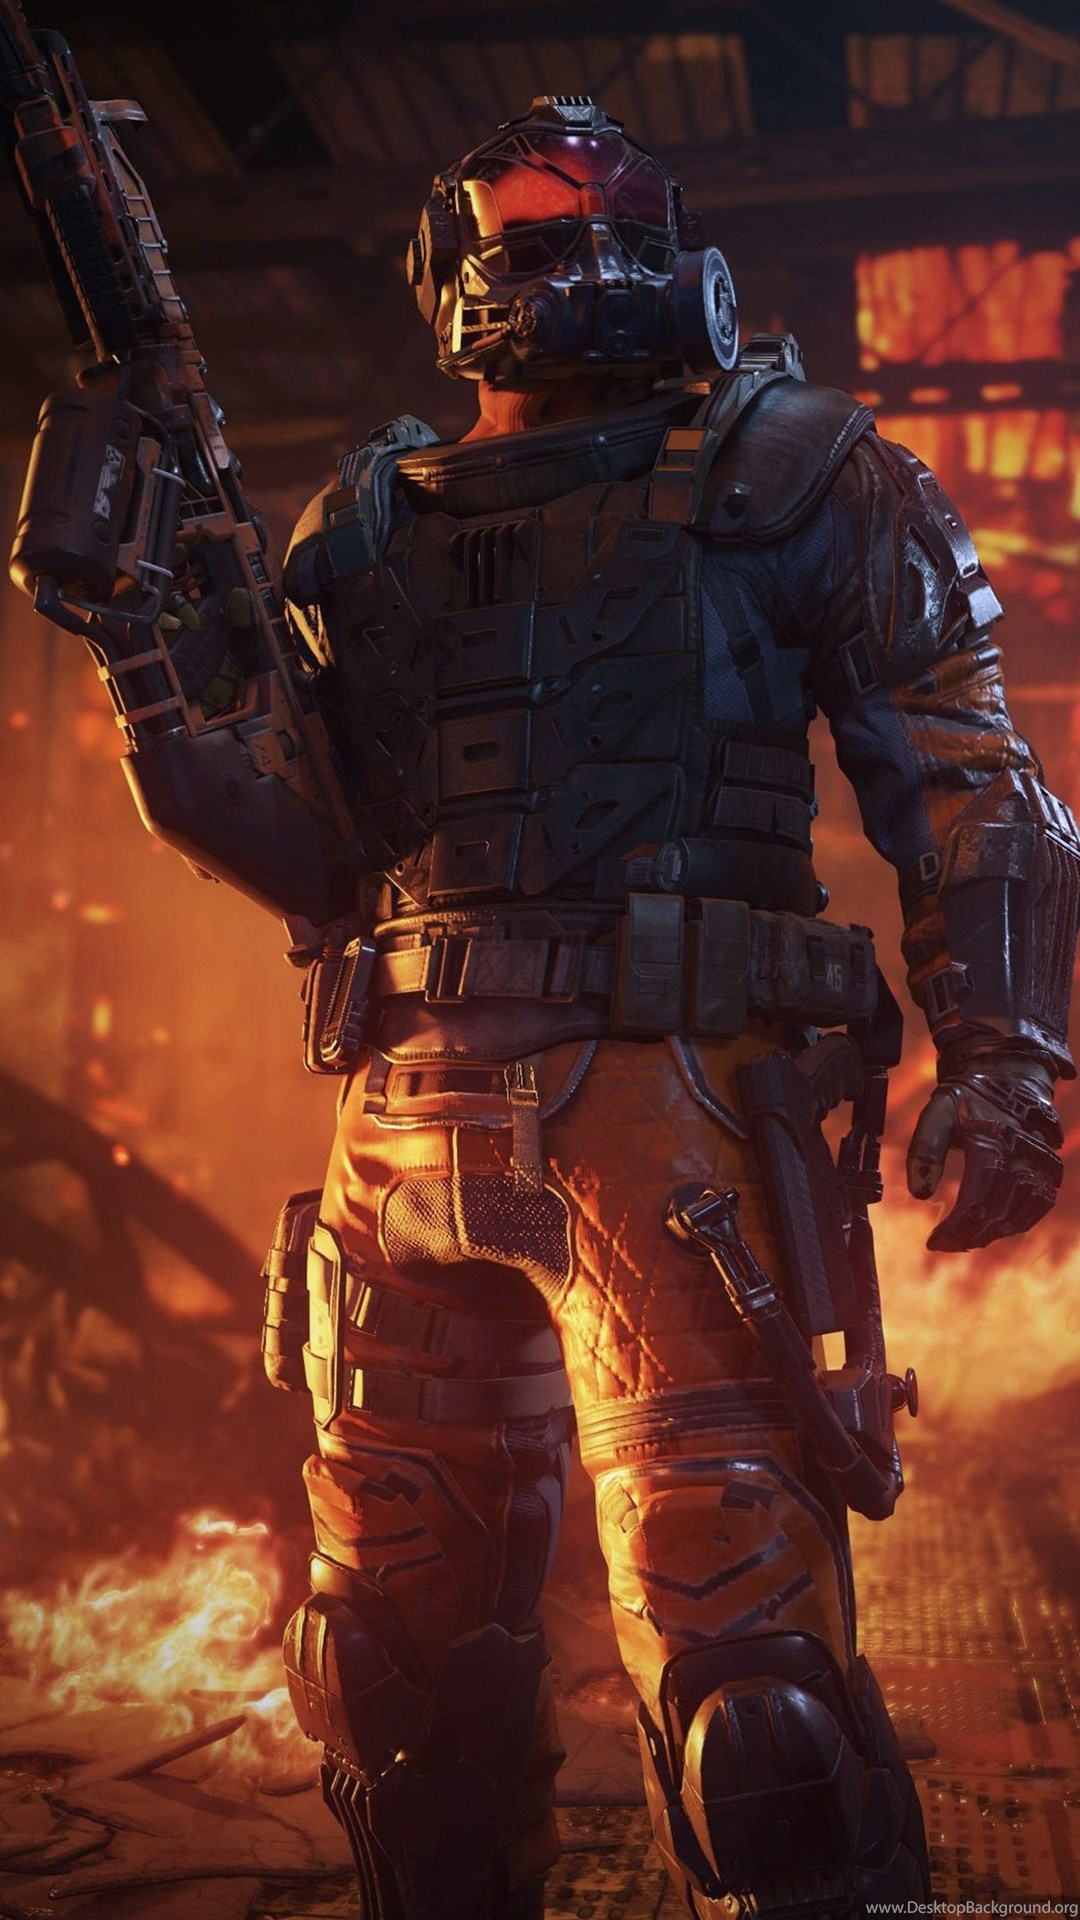 Epic Call Of Duty Black Ops 3 Wallpapers For Mobile Phones Call Images, Photos, Reviews